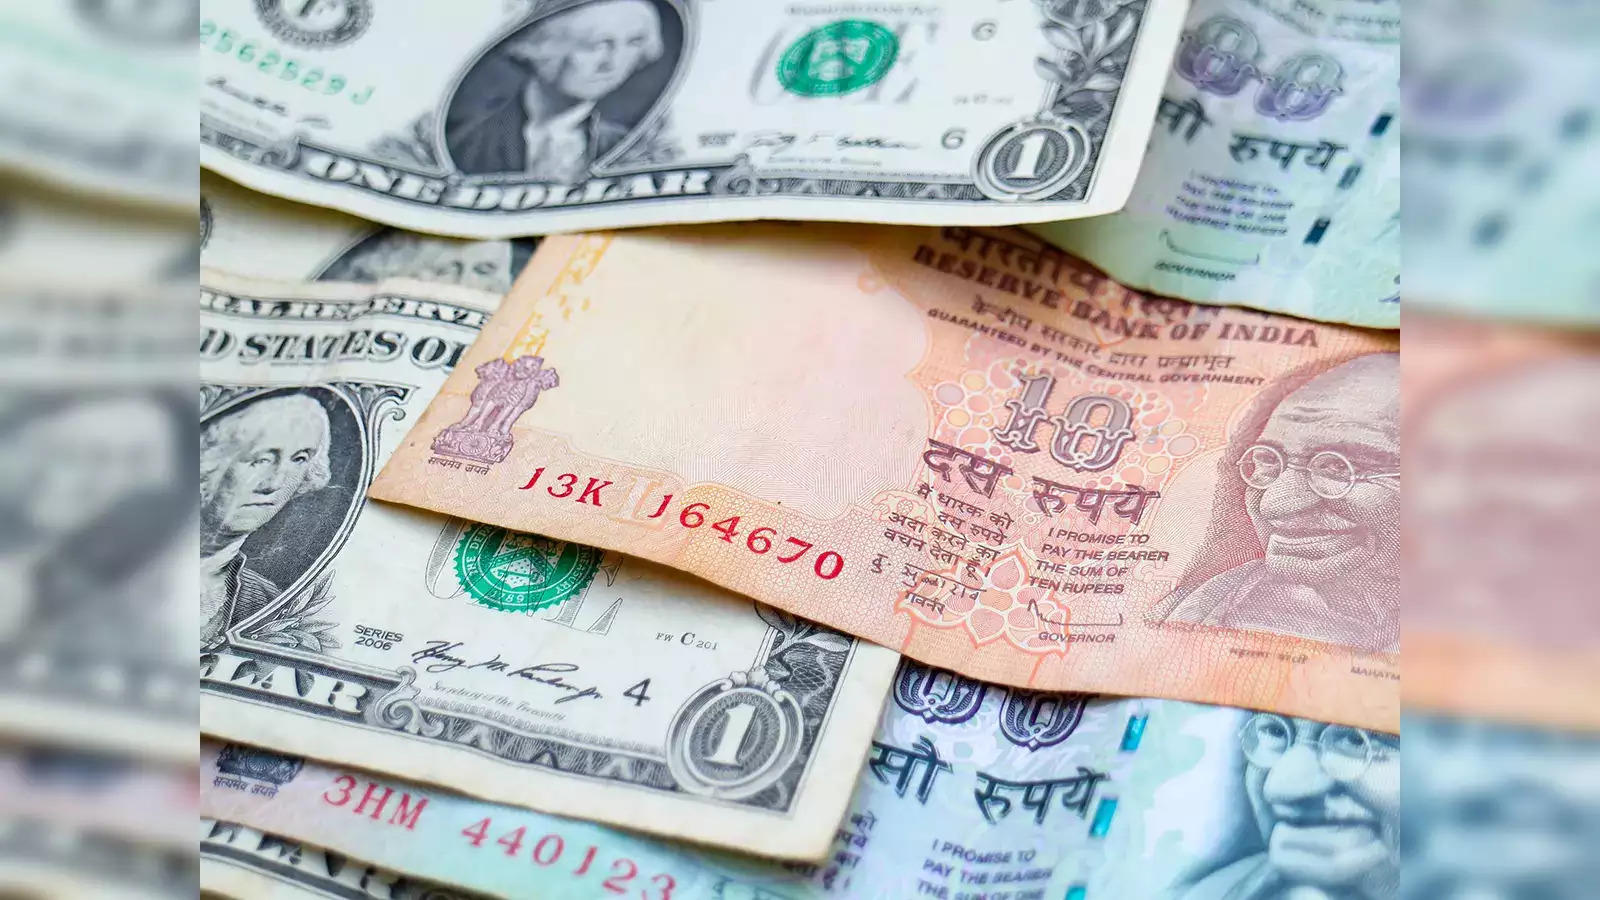 Rupee has depreciated 1.9% against the dollar over the last year 